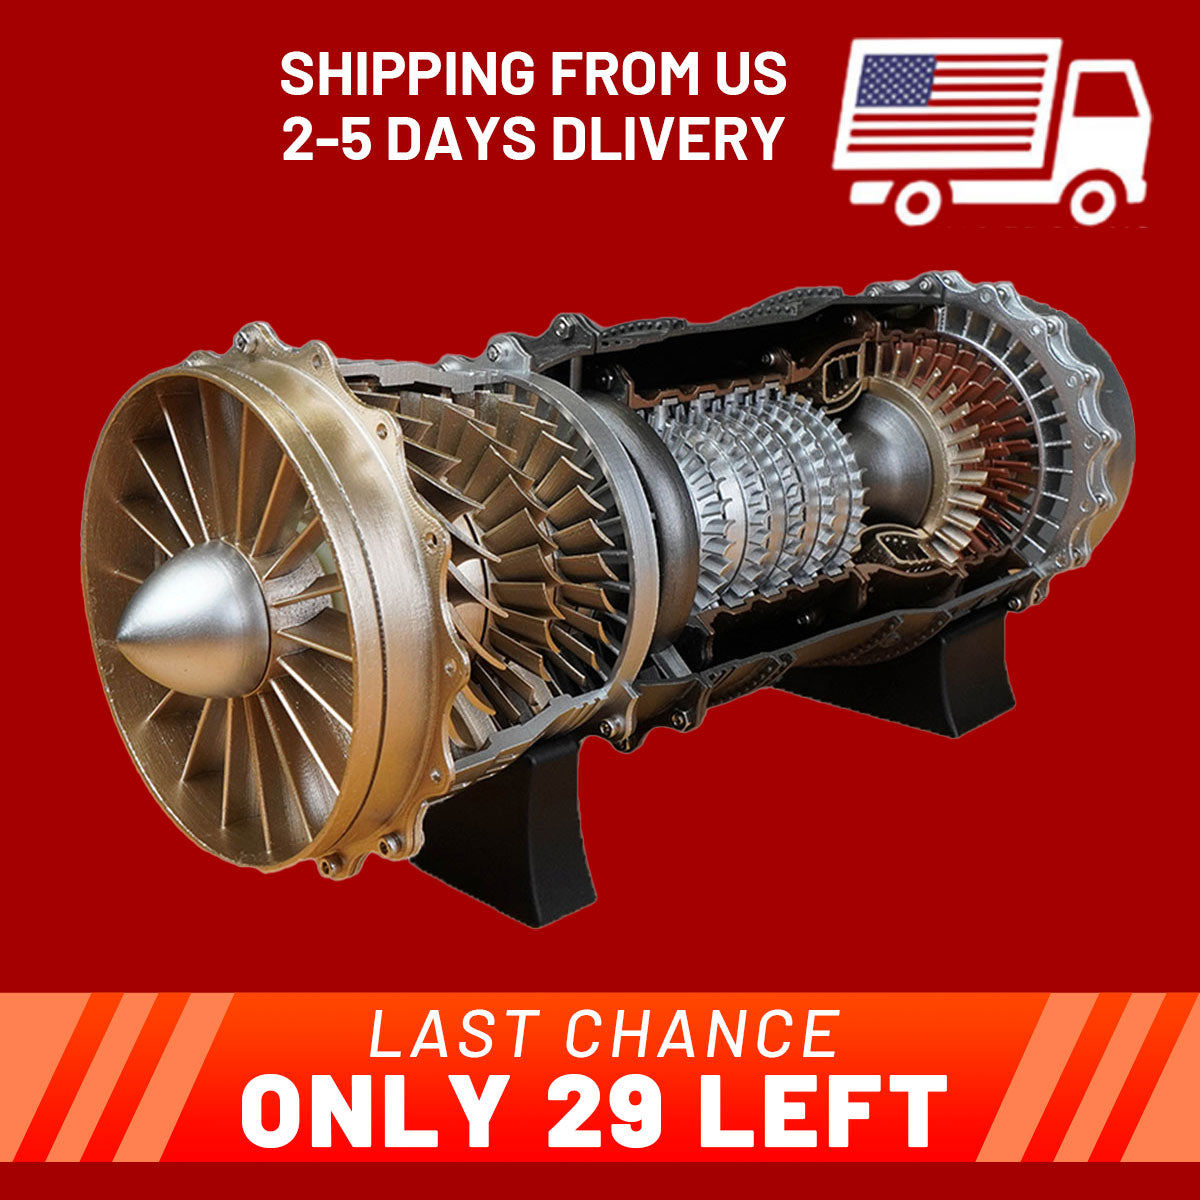 ws-15-turbofan-engine-shipping from-usa-directly-christmas-stirlingkit-official-website (3).jpg__PID:89bd401e-8c64-44aa-a3a5-0694017802c9